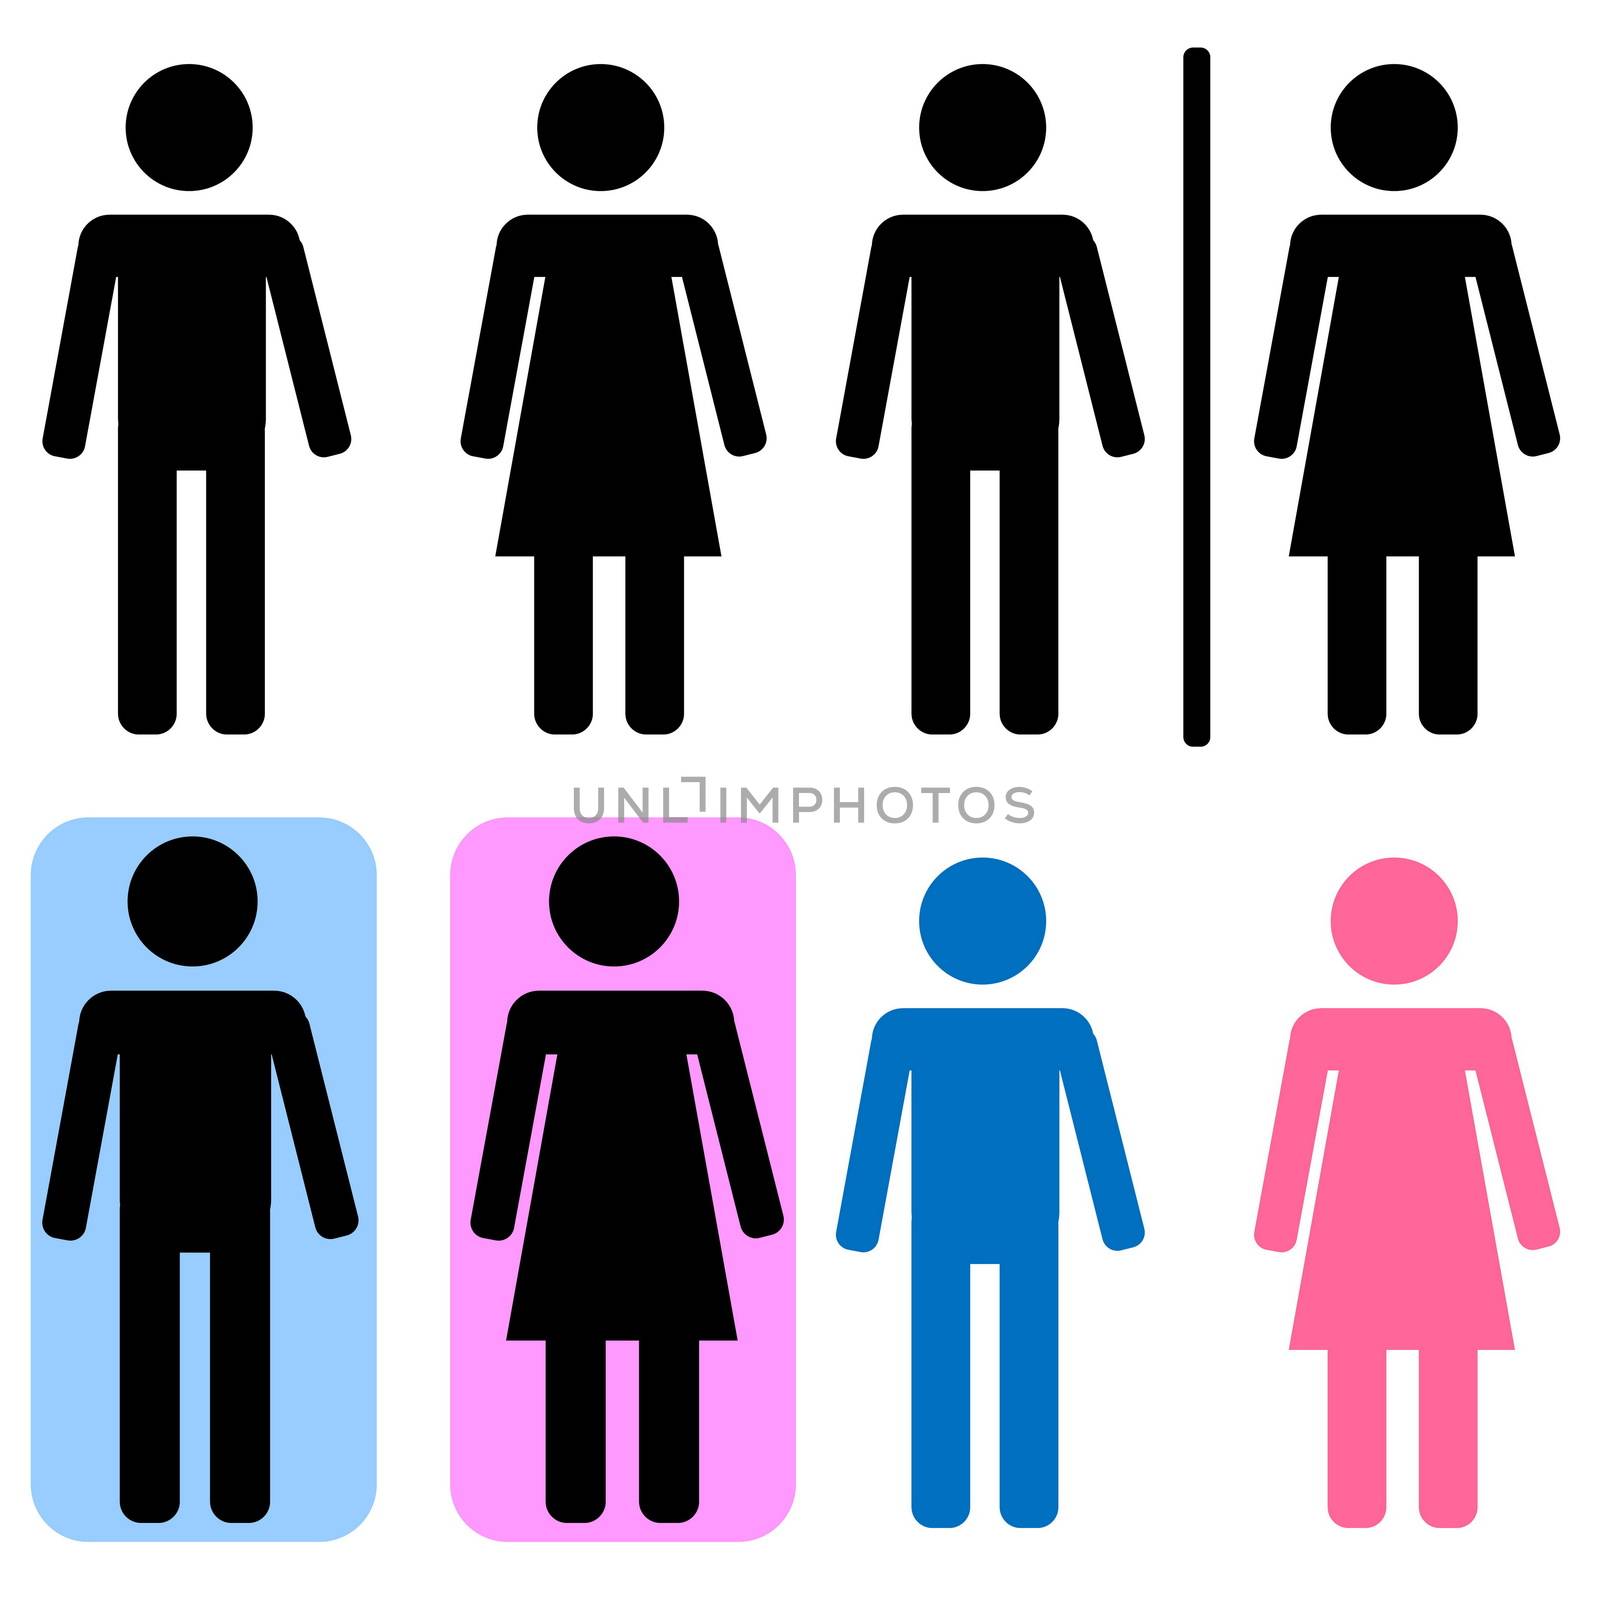 Black, blue, pink set of male and female signs in white background